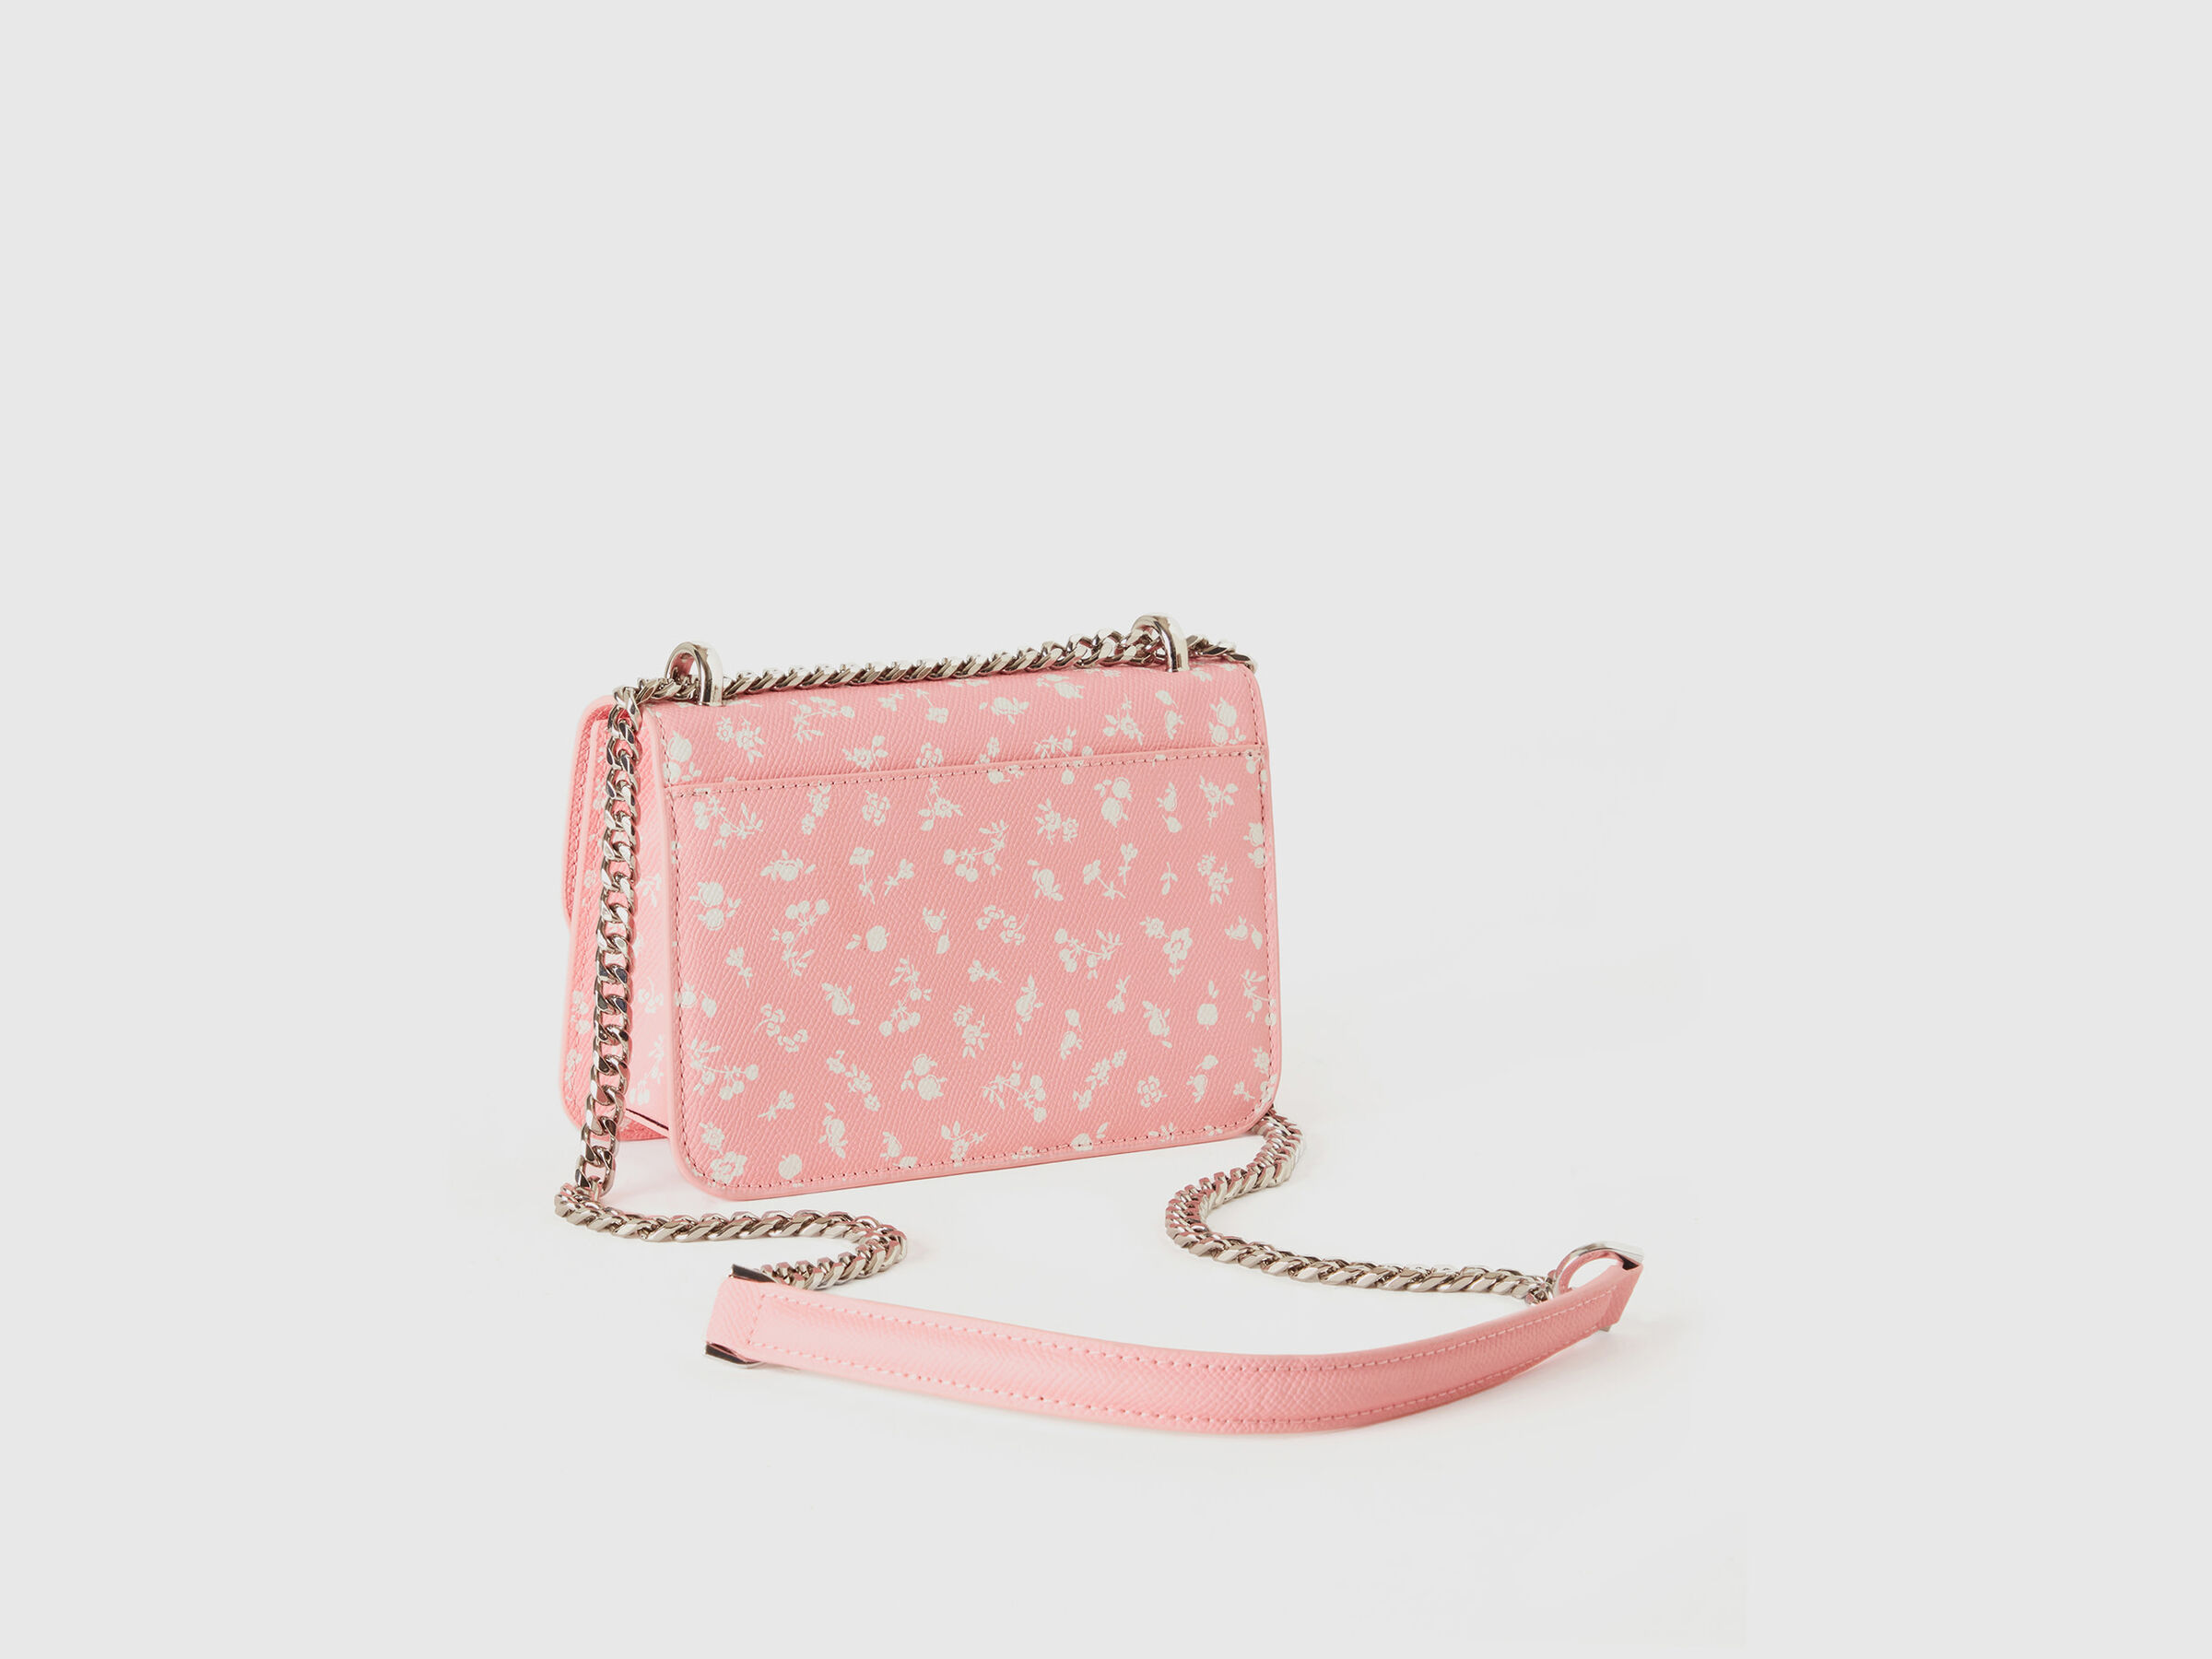 Small patterned Be Bag Pink Benetton